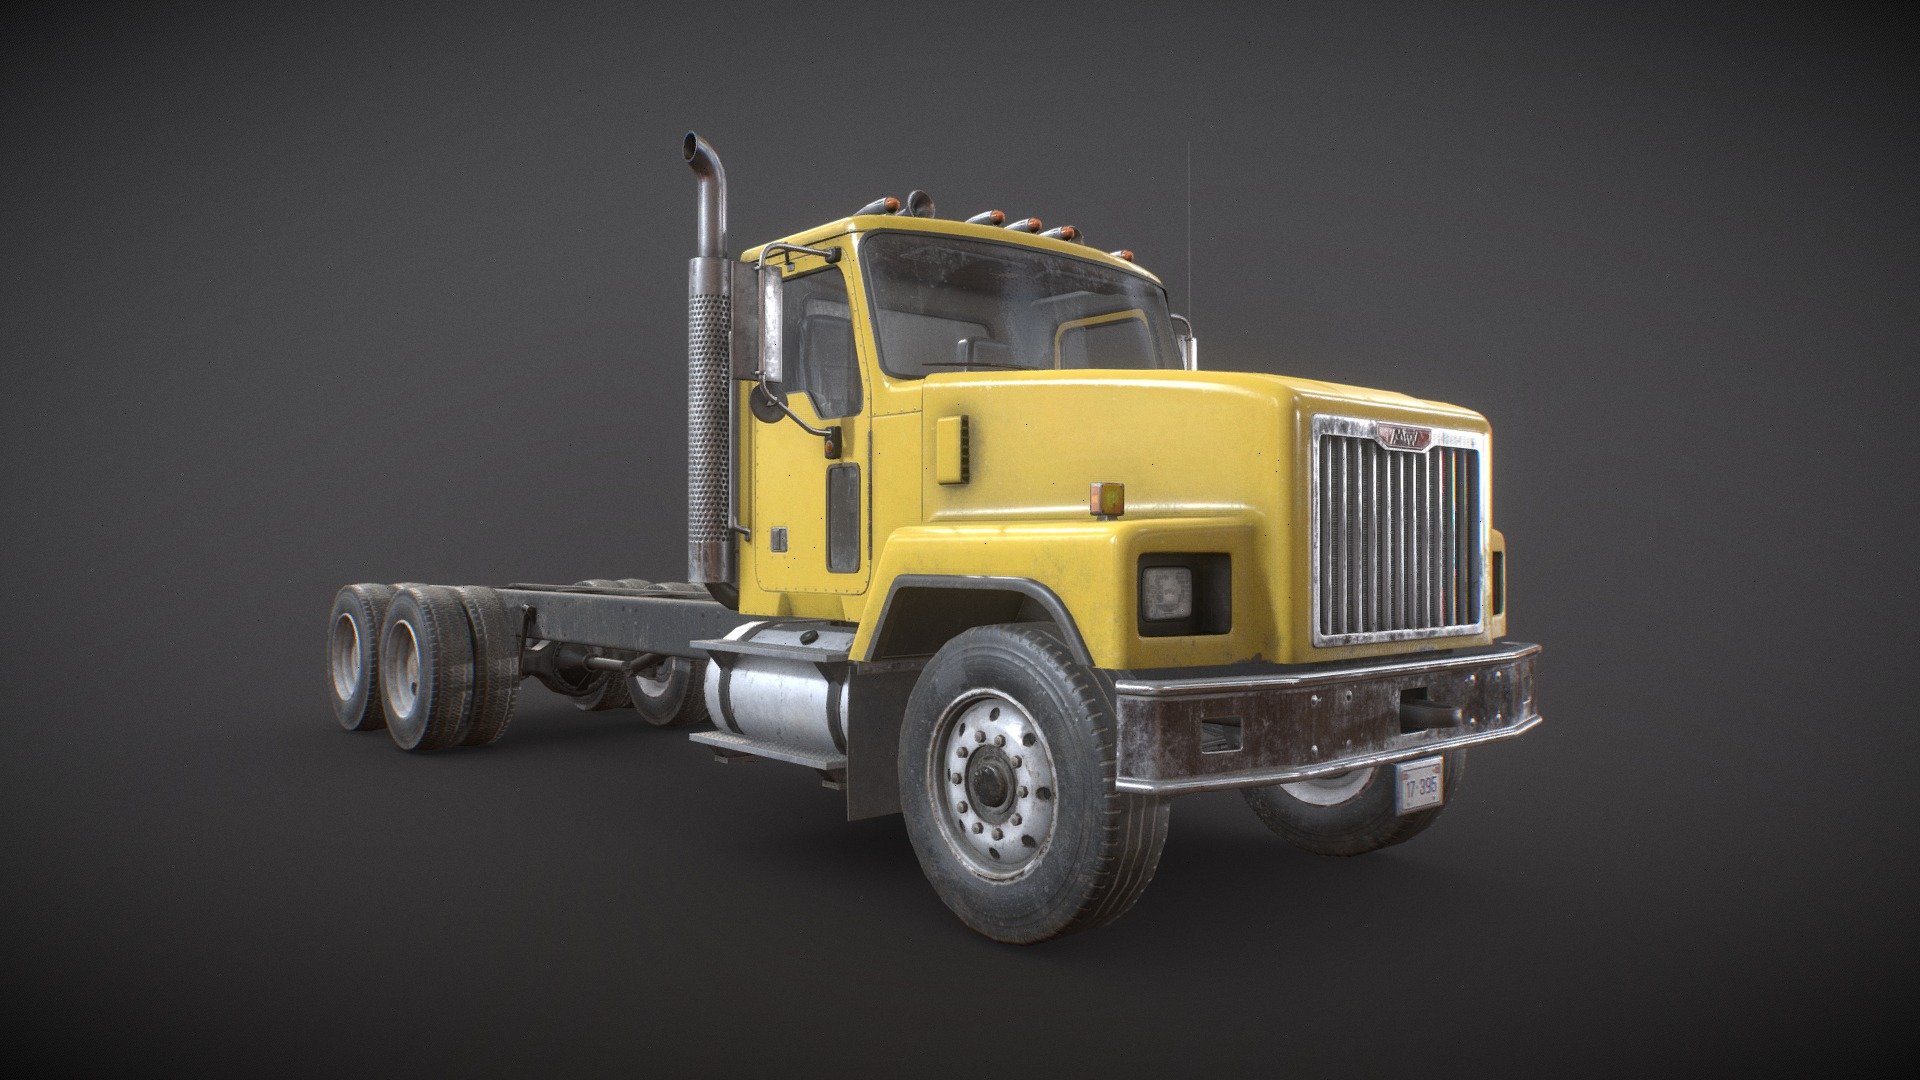 3D Model of generic Classic Truck, game-ready and low-poly:


Real-world scale and centered.
The unit of measurement used for the model is centimeters
Cabin interior fully modeled and textured.
Doors, wheels and steering wheel are separated and can be easily rigged/animated.
Interior is a separate object to detach if needed.
PBR textures made in Substance Painter
All branding and labels are custom made.
Second uv channel included for lightmaps.
Average texel density: 800-900 px/m

Total Polys:  16.106 (31.129 tris)

Maps sizes: 


Body: 4096x4096
Chassis: 4096x4096
Interior: 4096x4096
Wheels: 2048x2048
Glass: 2048x2048

Provided Maps:


Albedo 
Normal
Roughness
Metalness
AO
Opacity included in Albedo (glass)
Emissive

Formats Incuded - MAX / BLEND / OBJ / FBX 

Packed ORM textures available uppon request

This model can be used for any game, film, personal project, etc. You may not resell or redistribute any content - Classic Truck - Yellow - Low Poly - Buy Royalty Free 3D model by MSWoodvine 3d model